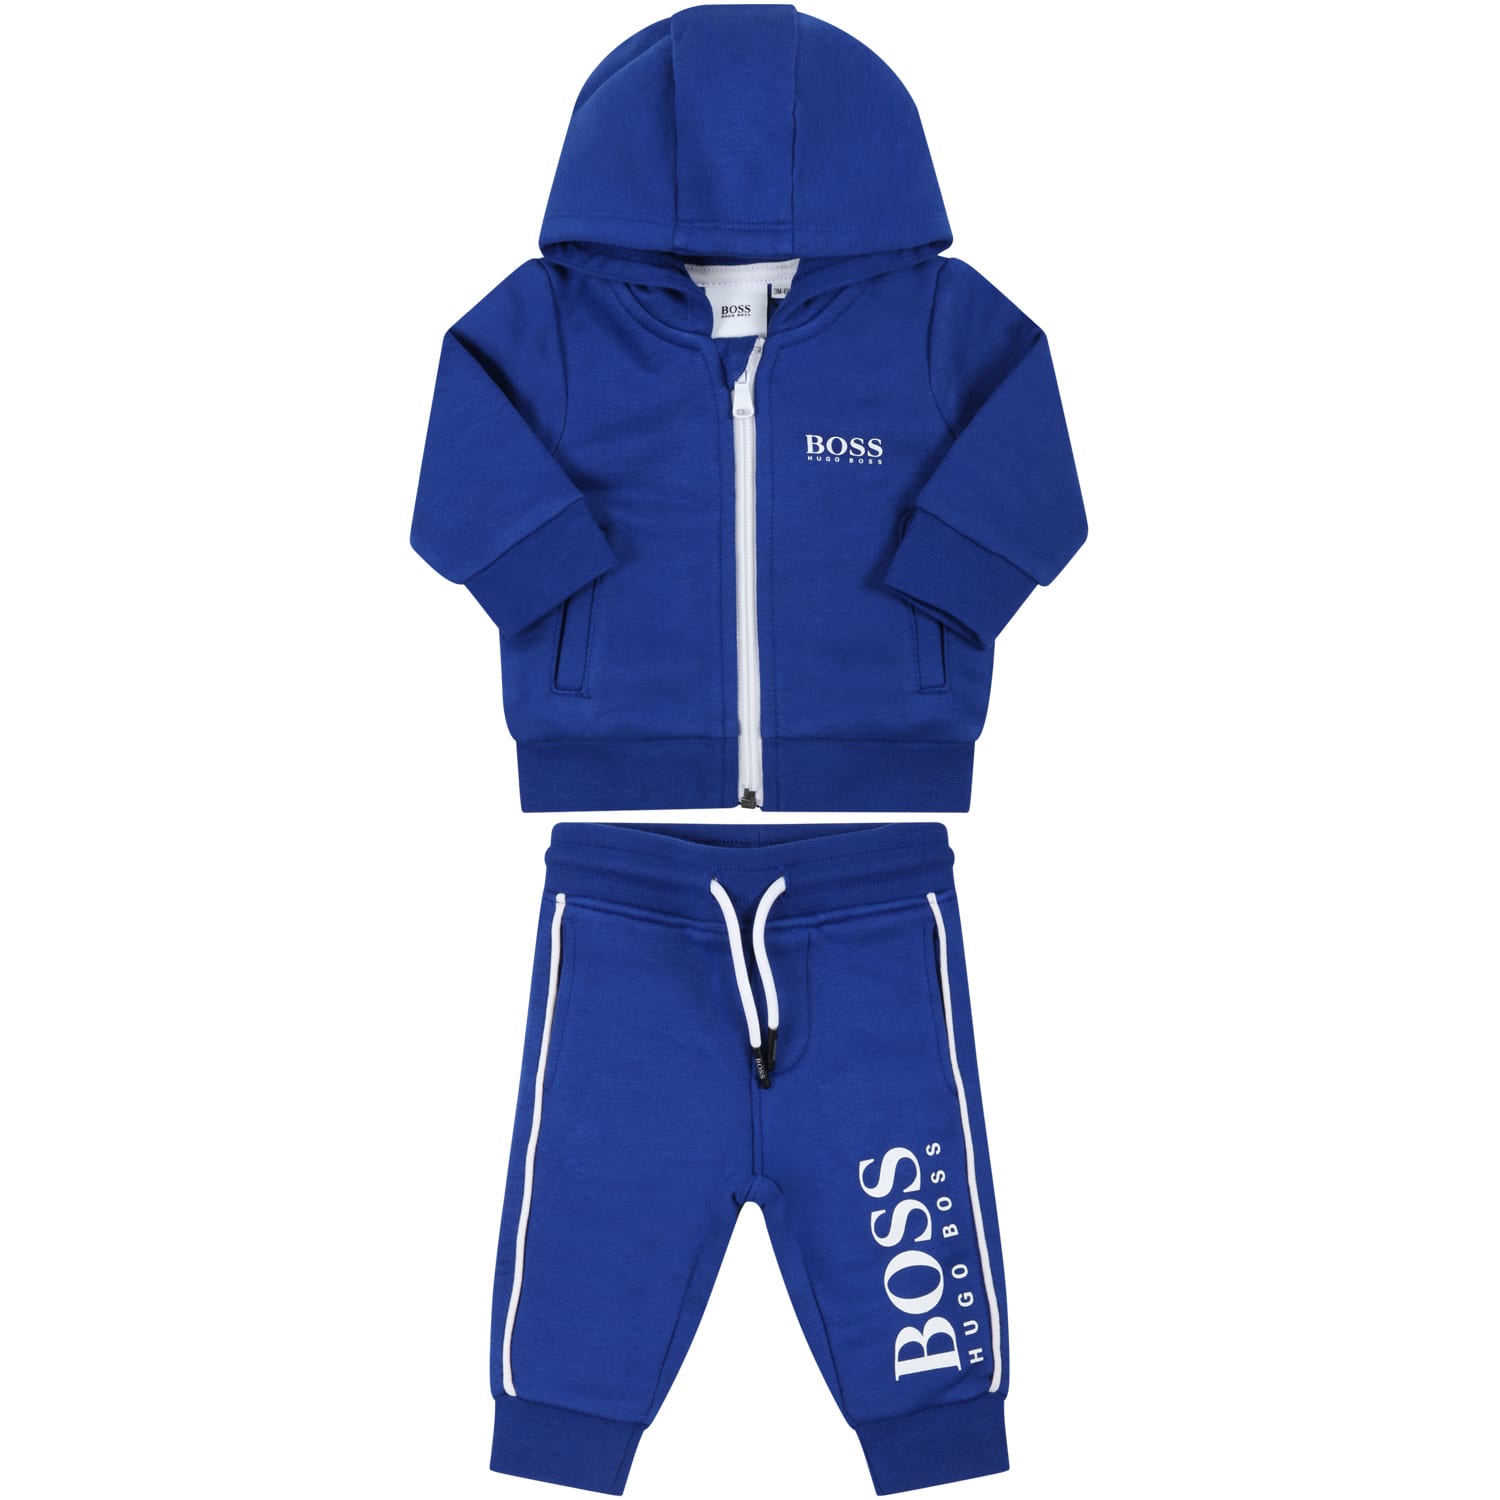 Hugo Boss Blue Suit For Baby Boy With White Logo